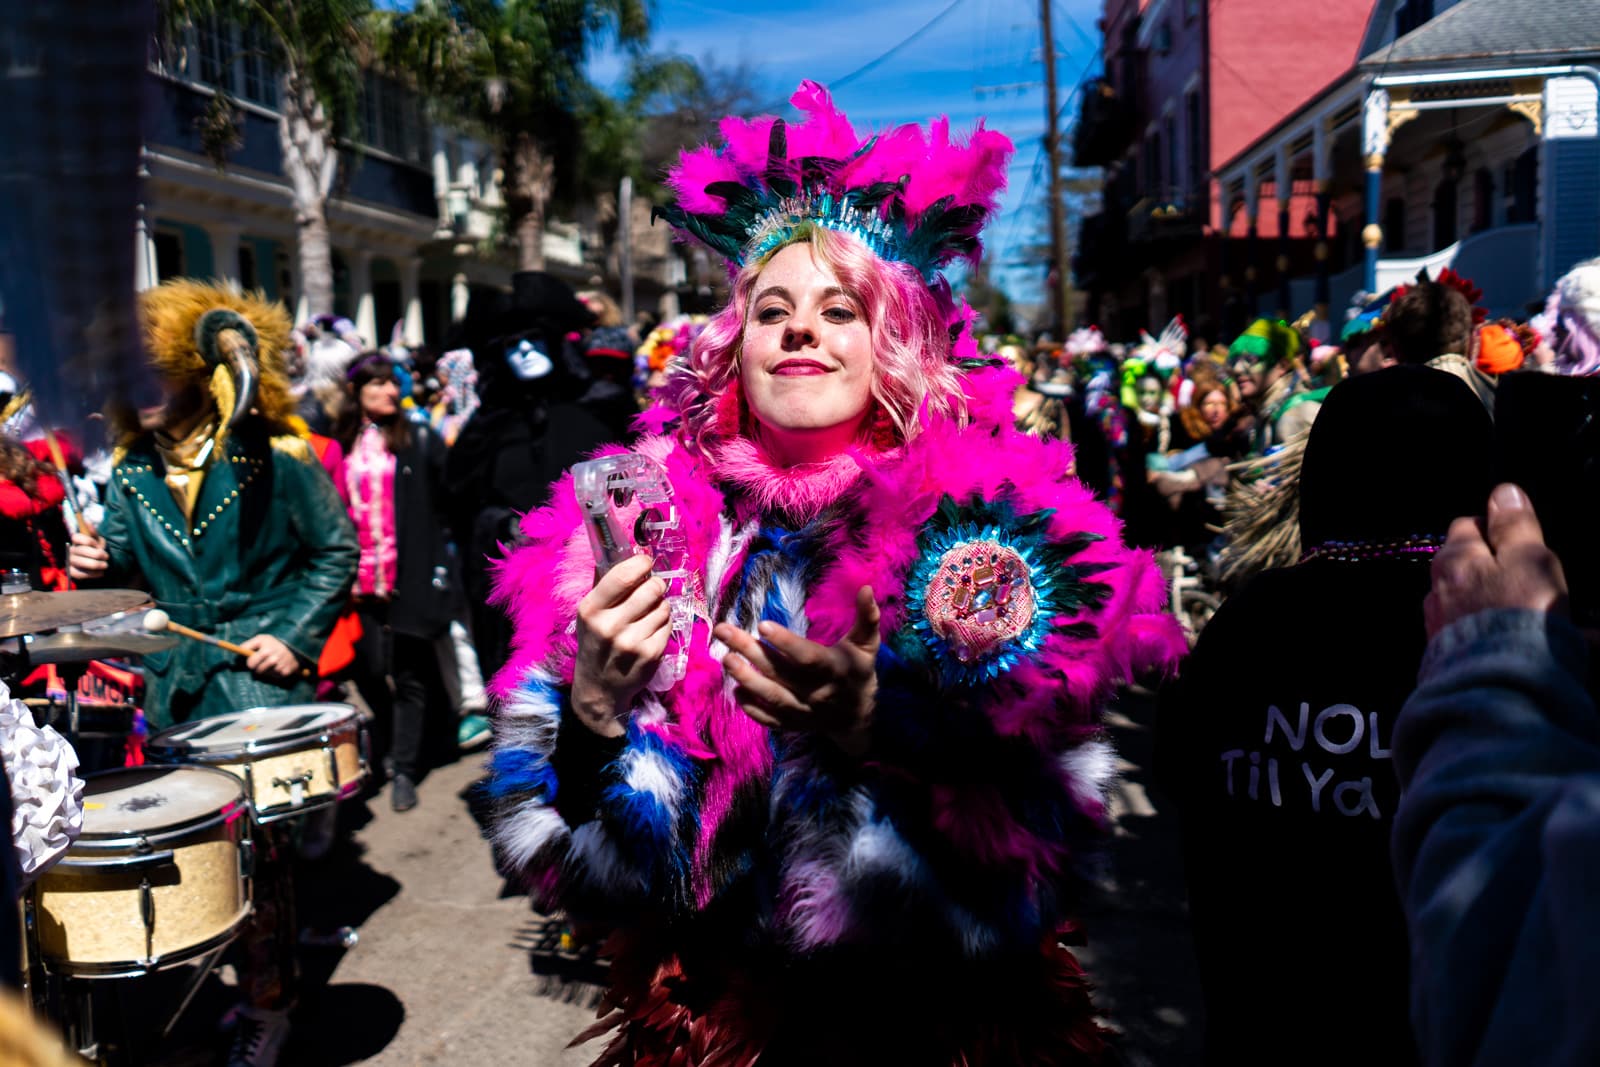 Girl with pink hair parading on Mardi Gras day